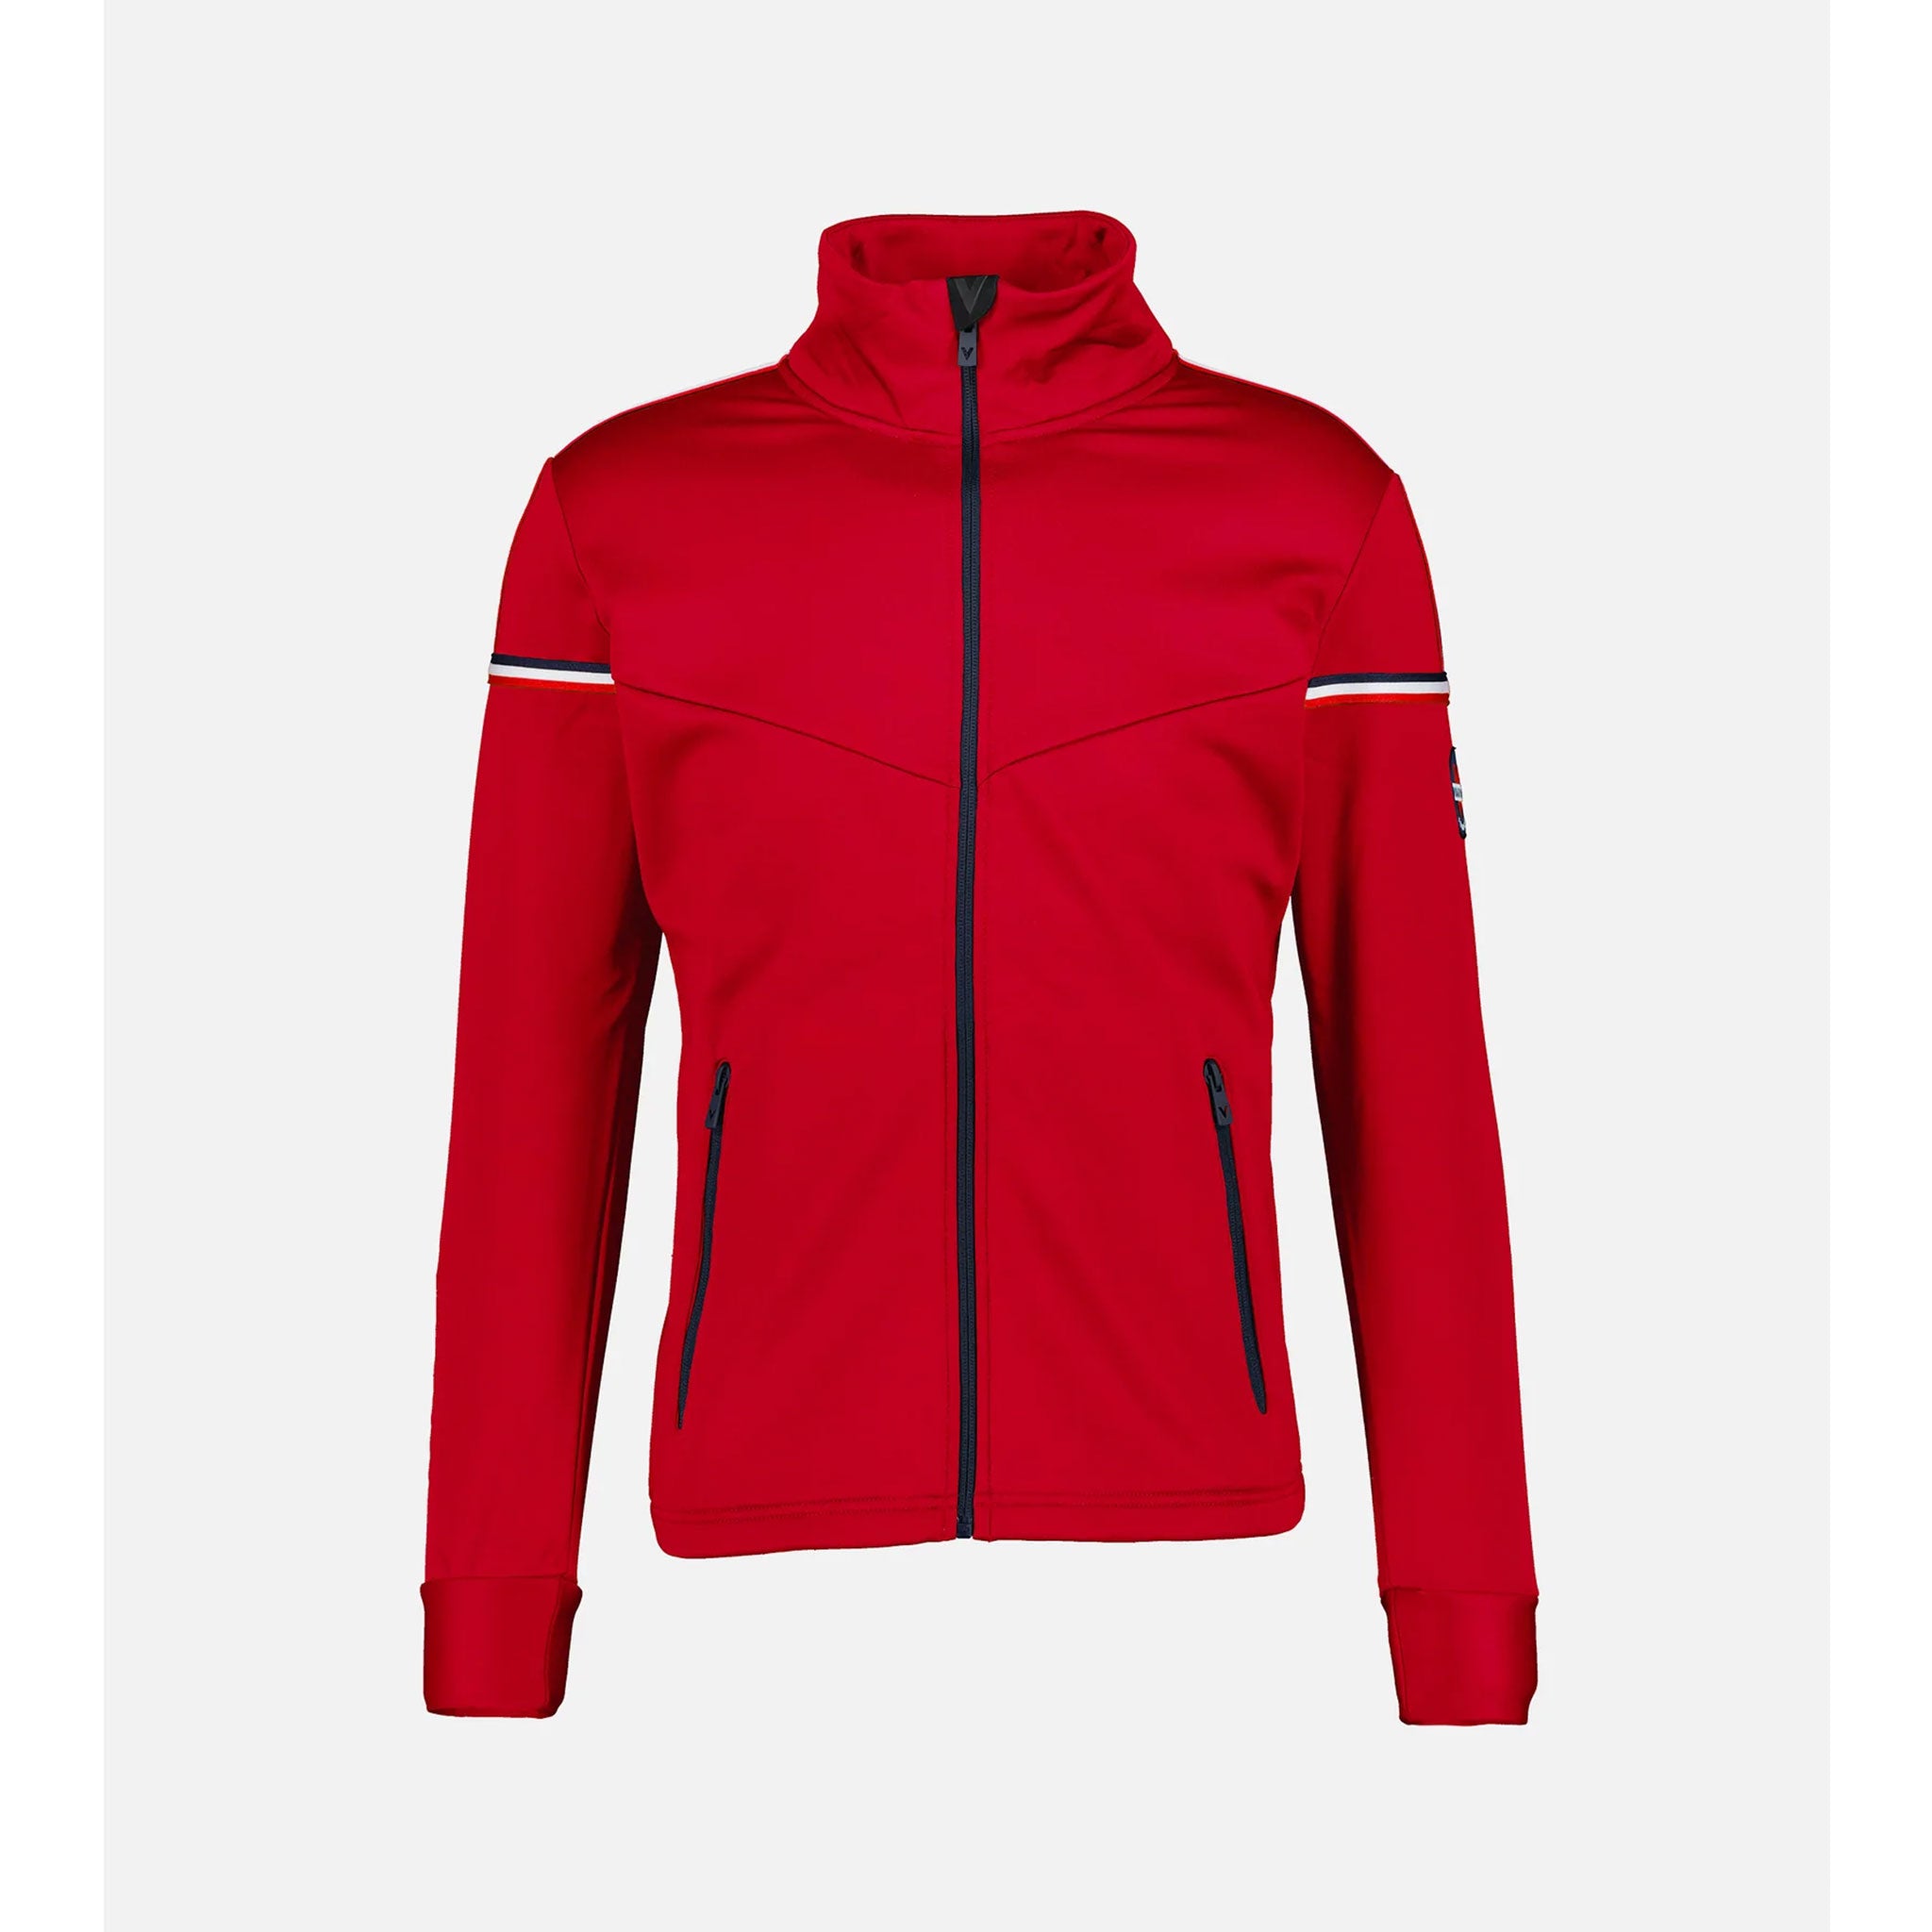 Sevice Fleece in Red